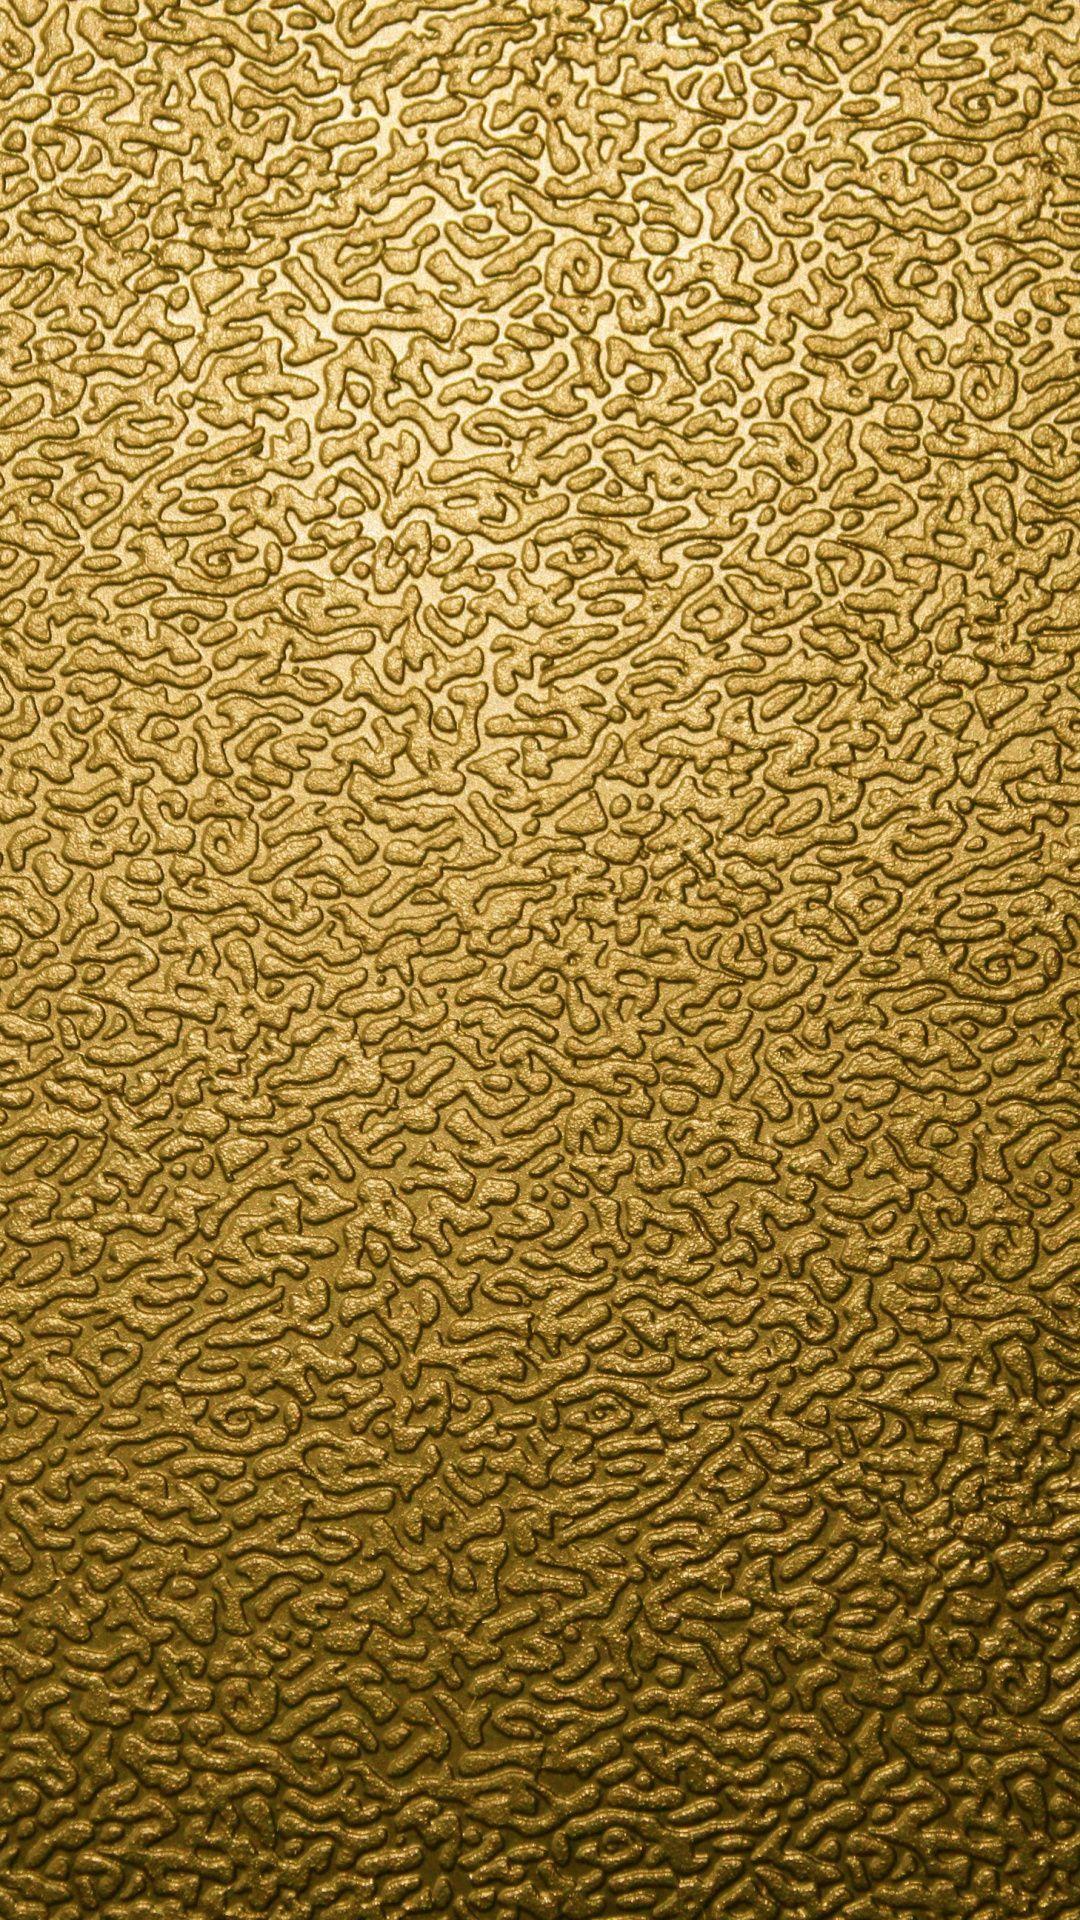 Brown and Gold Wallpapers - Top Free Brown and Gold Backgrounds ...